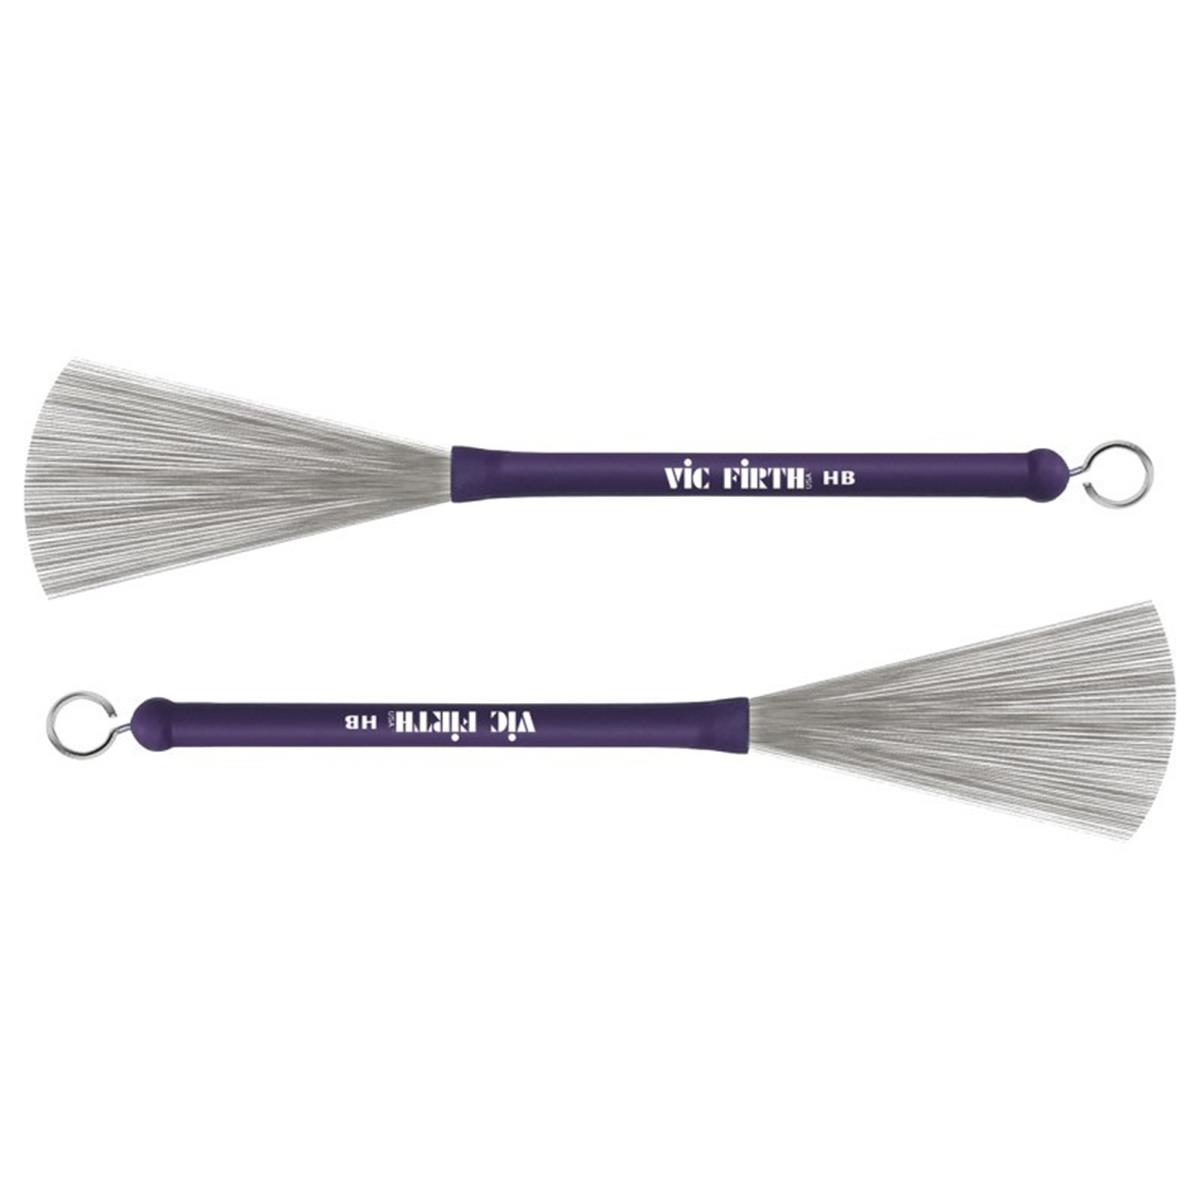 VIC-FIRTH-AB-HB-HERITAGE-BRUSH-SPAZZOLE-sku-701